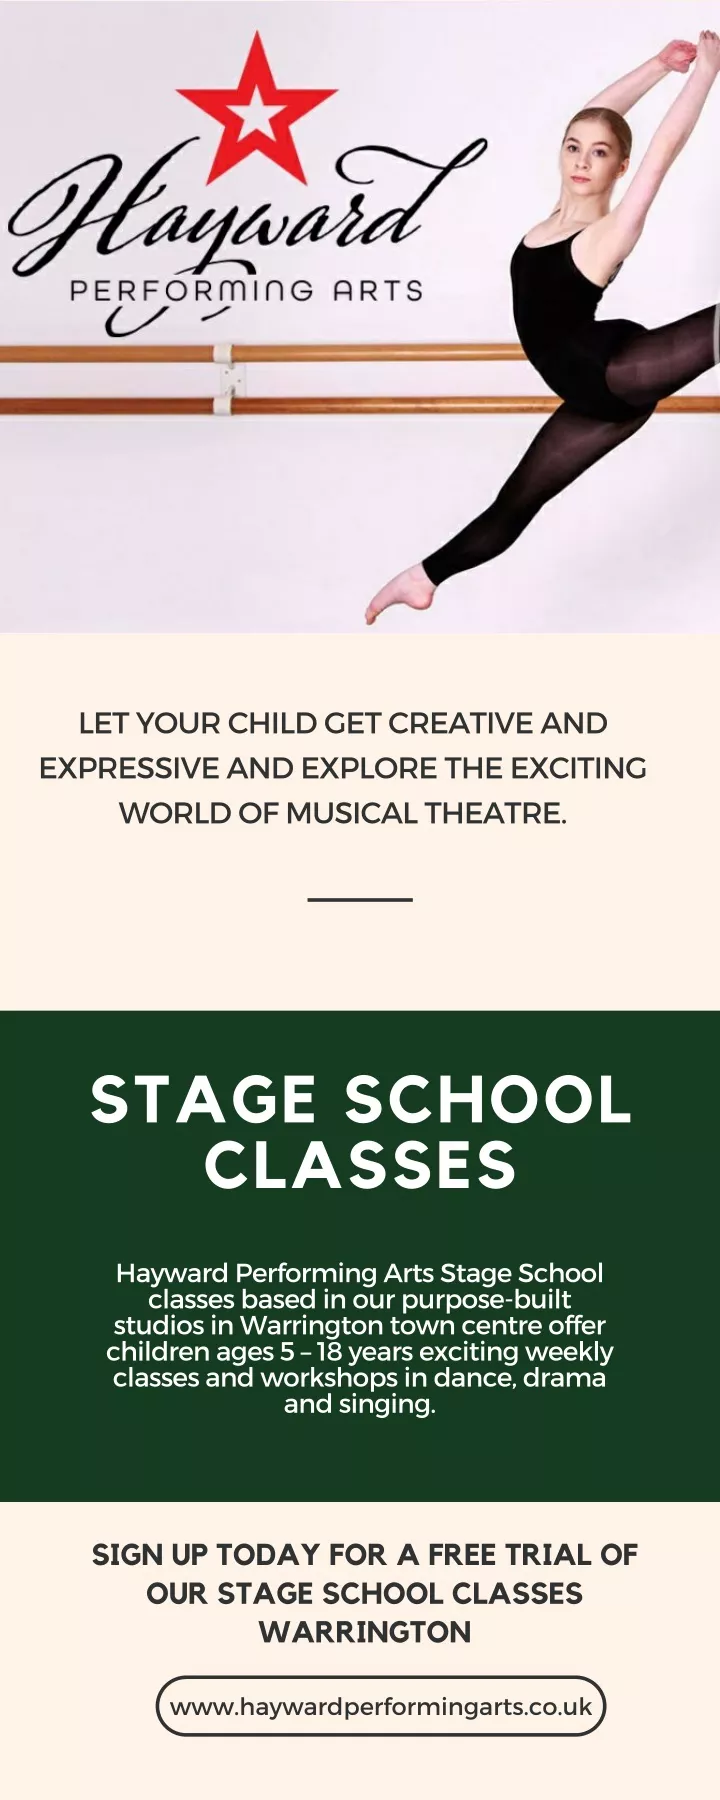 let your child get creative and expressive